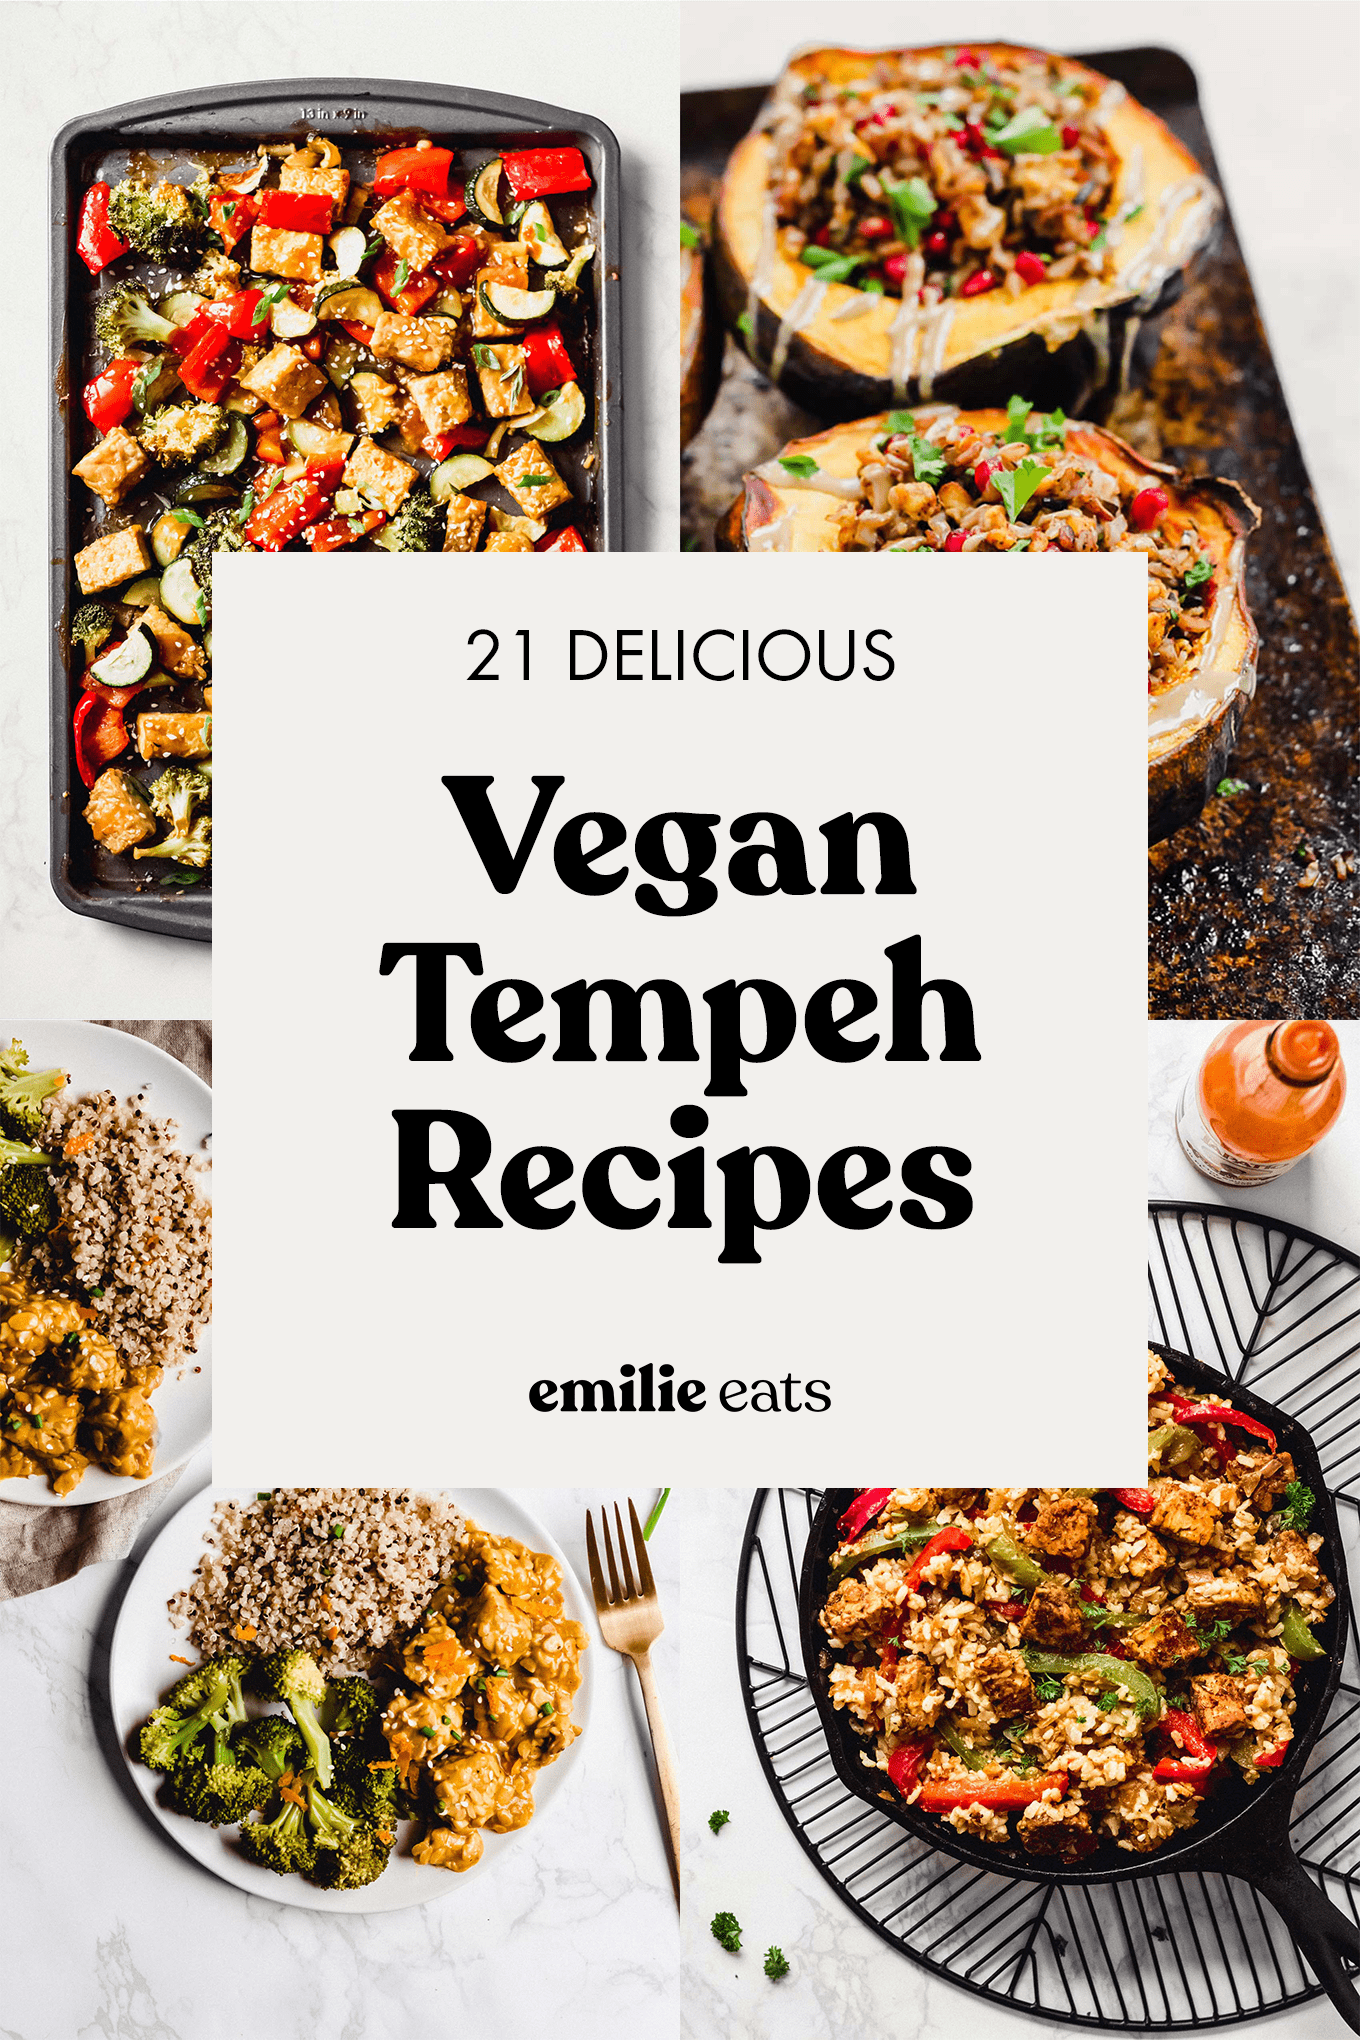 https://www.emilieeats.com/wp-content/uploads/2019/02/21-vegan-recipes-with-tempeh-healthy-dinner-easy-protein-hero.png